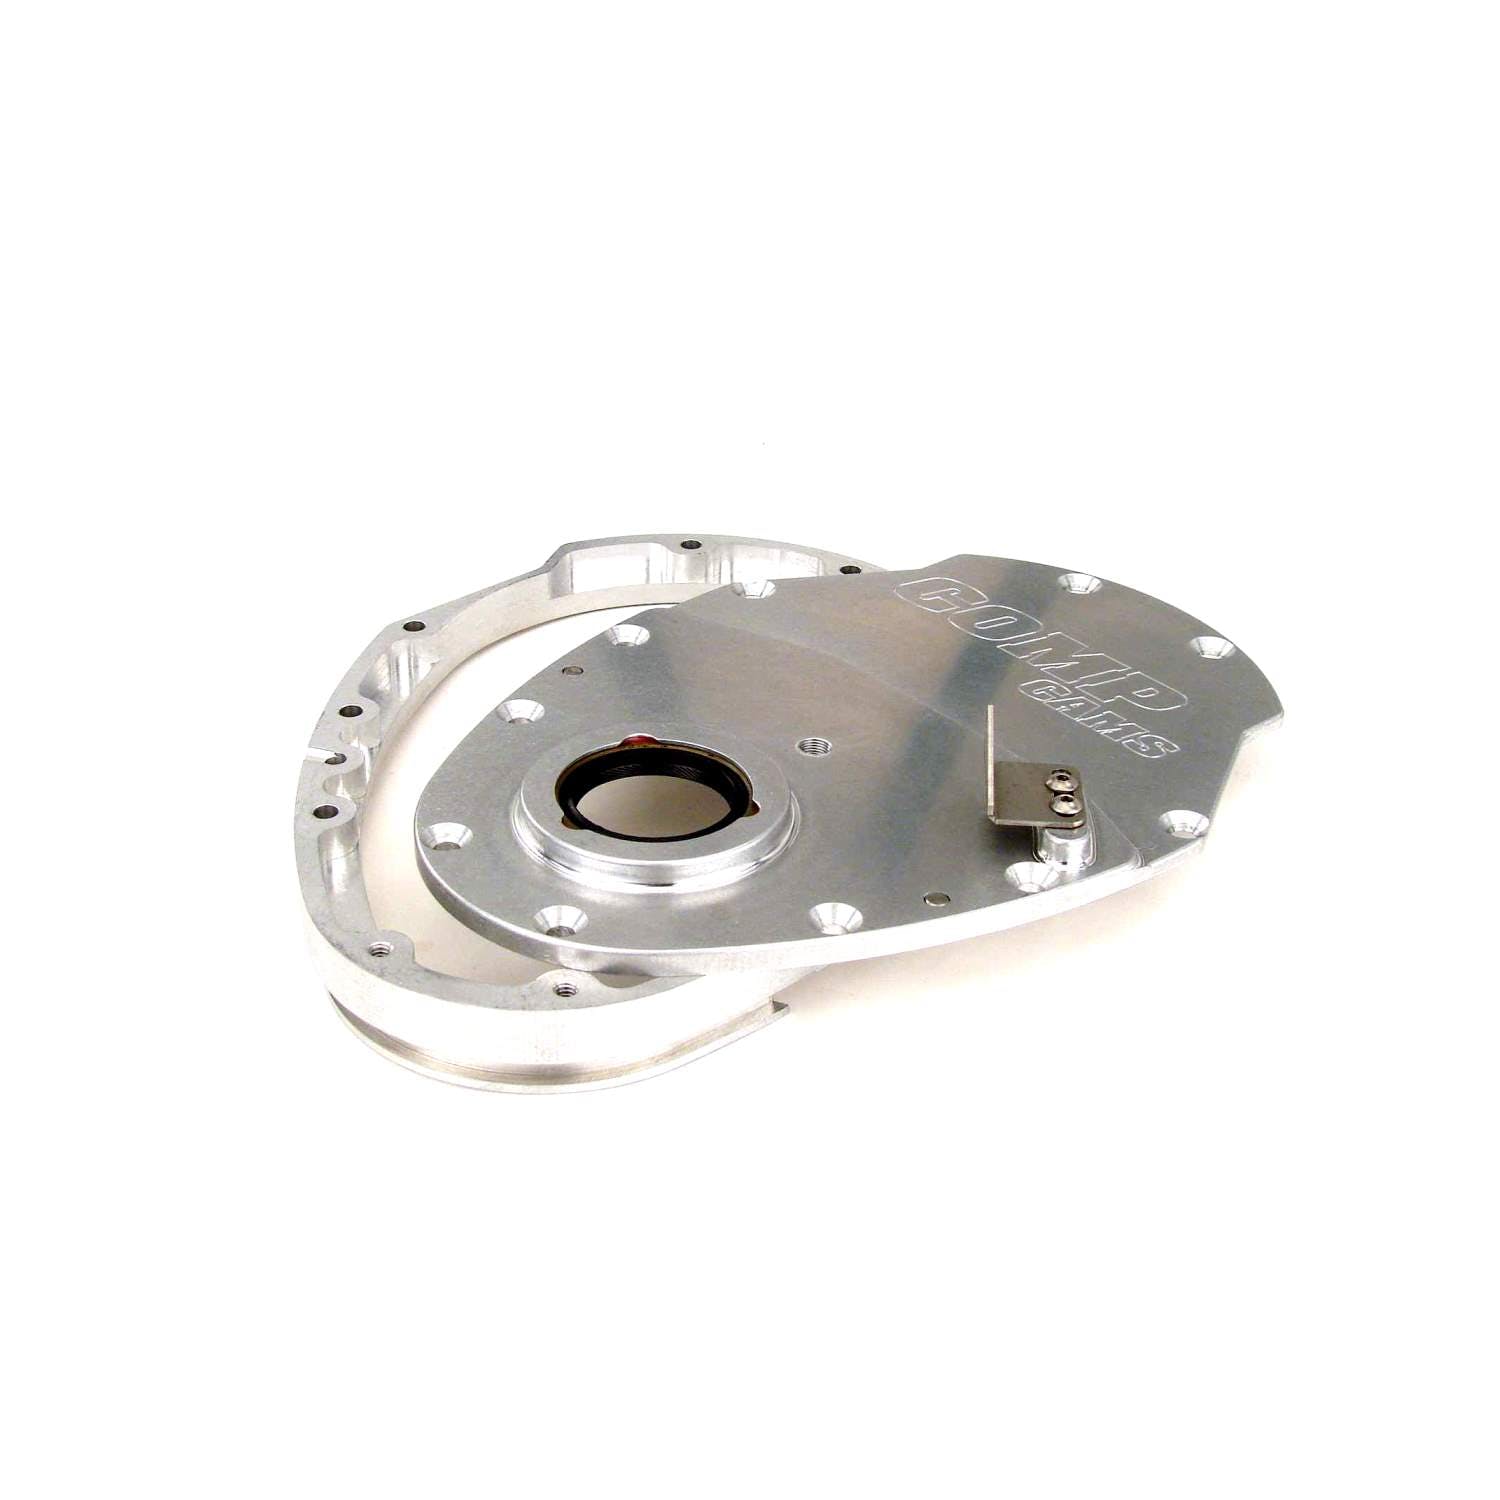 Competition Cams 210 Billet Aluminum Timing Cover